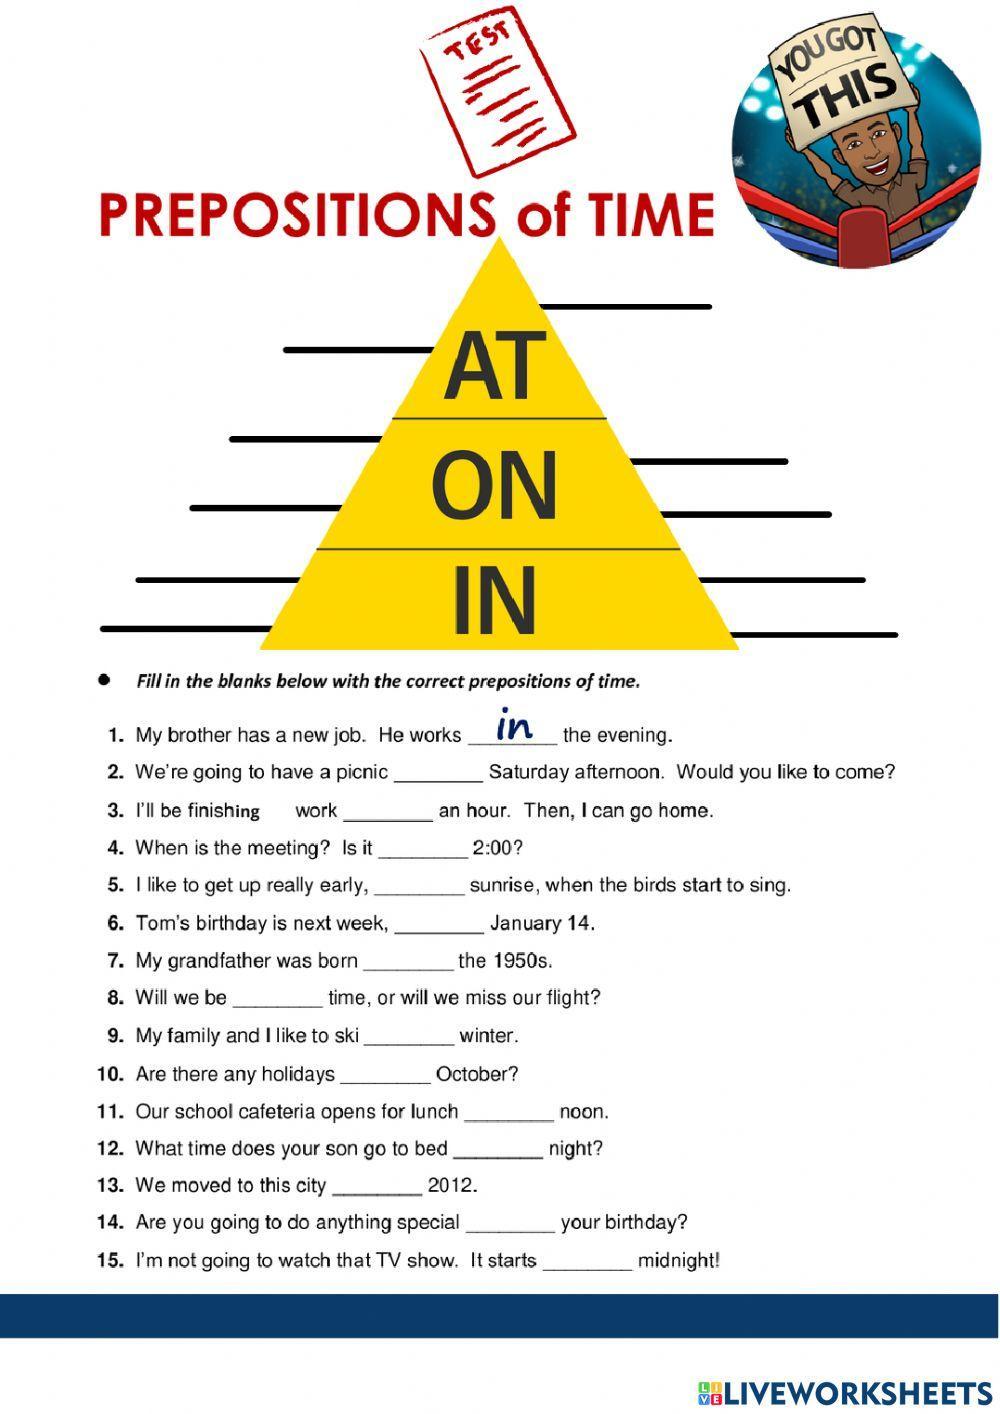 TEST PREPOSITIONS OF TIME at, on, in